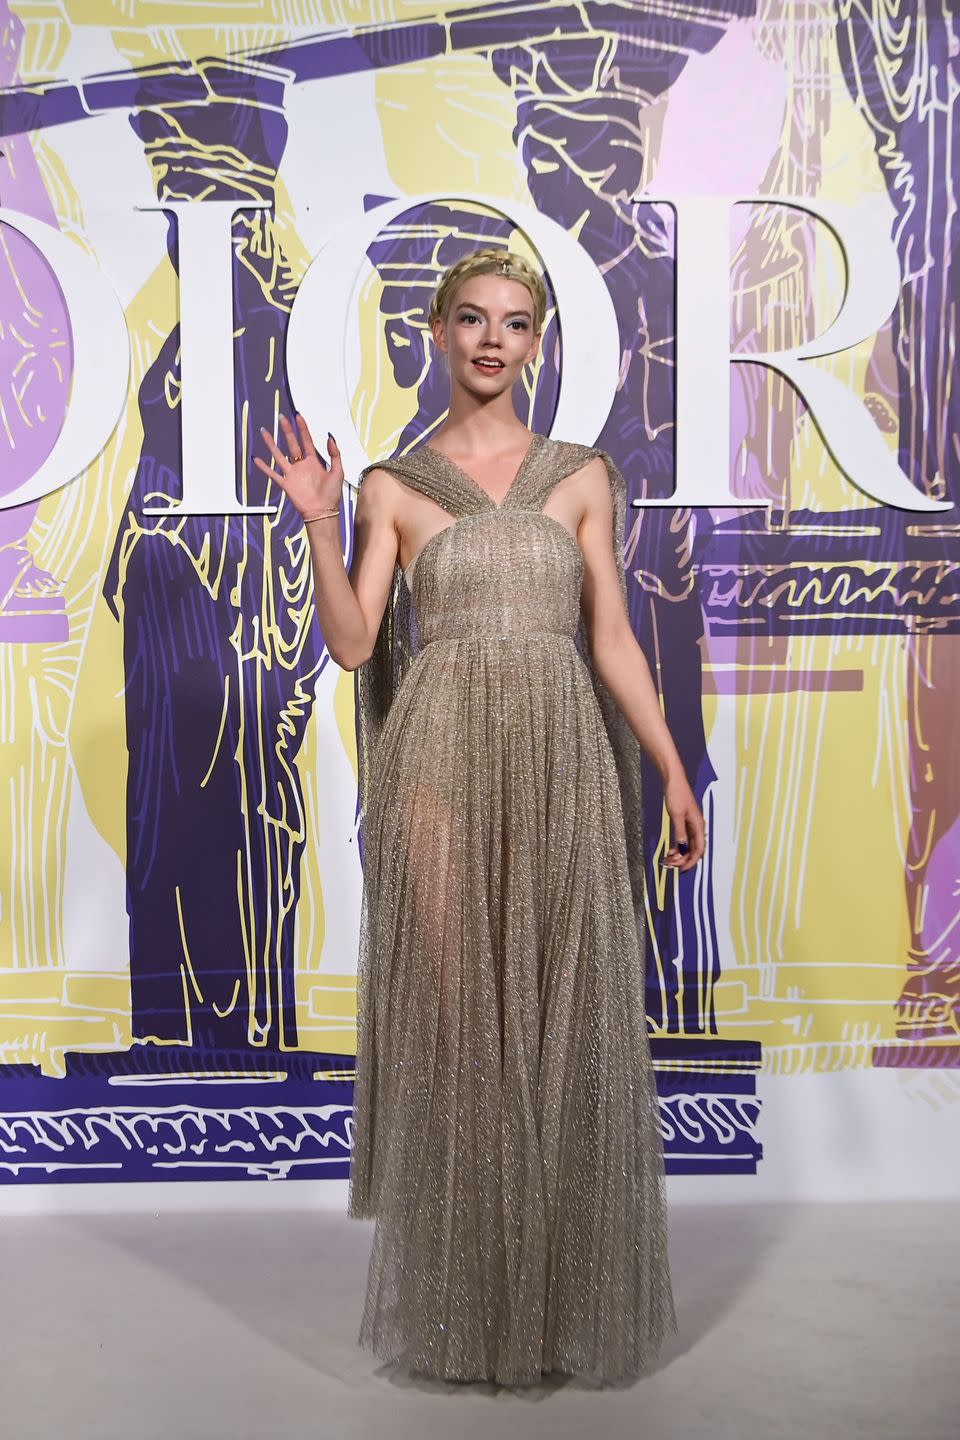 <p>The actor attended the Dior Cruise 2022 show in Athens wearing a shimmering gold Grecian-style gown by Dior.</p>